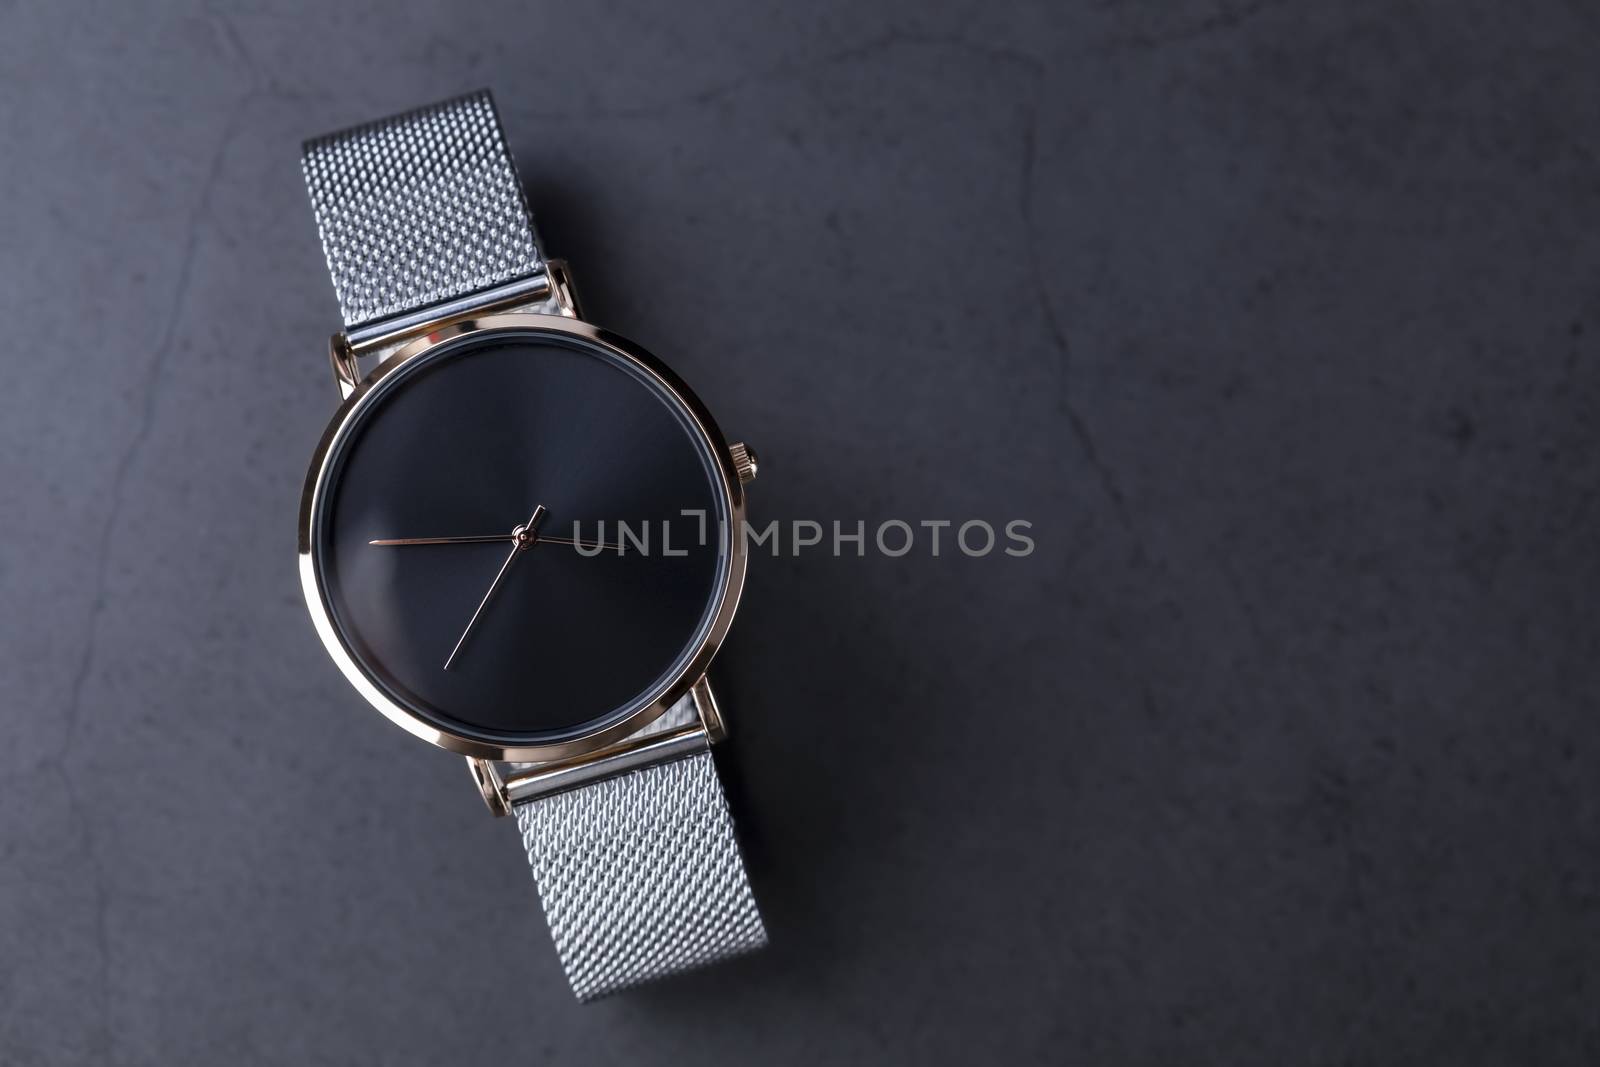 Wrist watch for women on black background by manaemedia